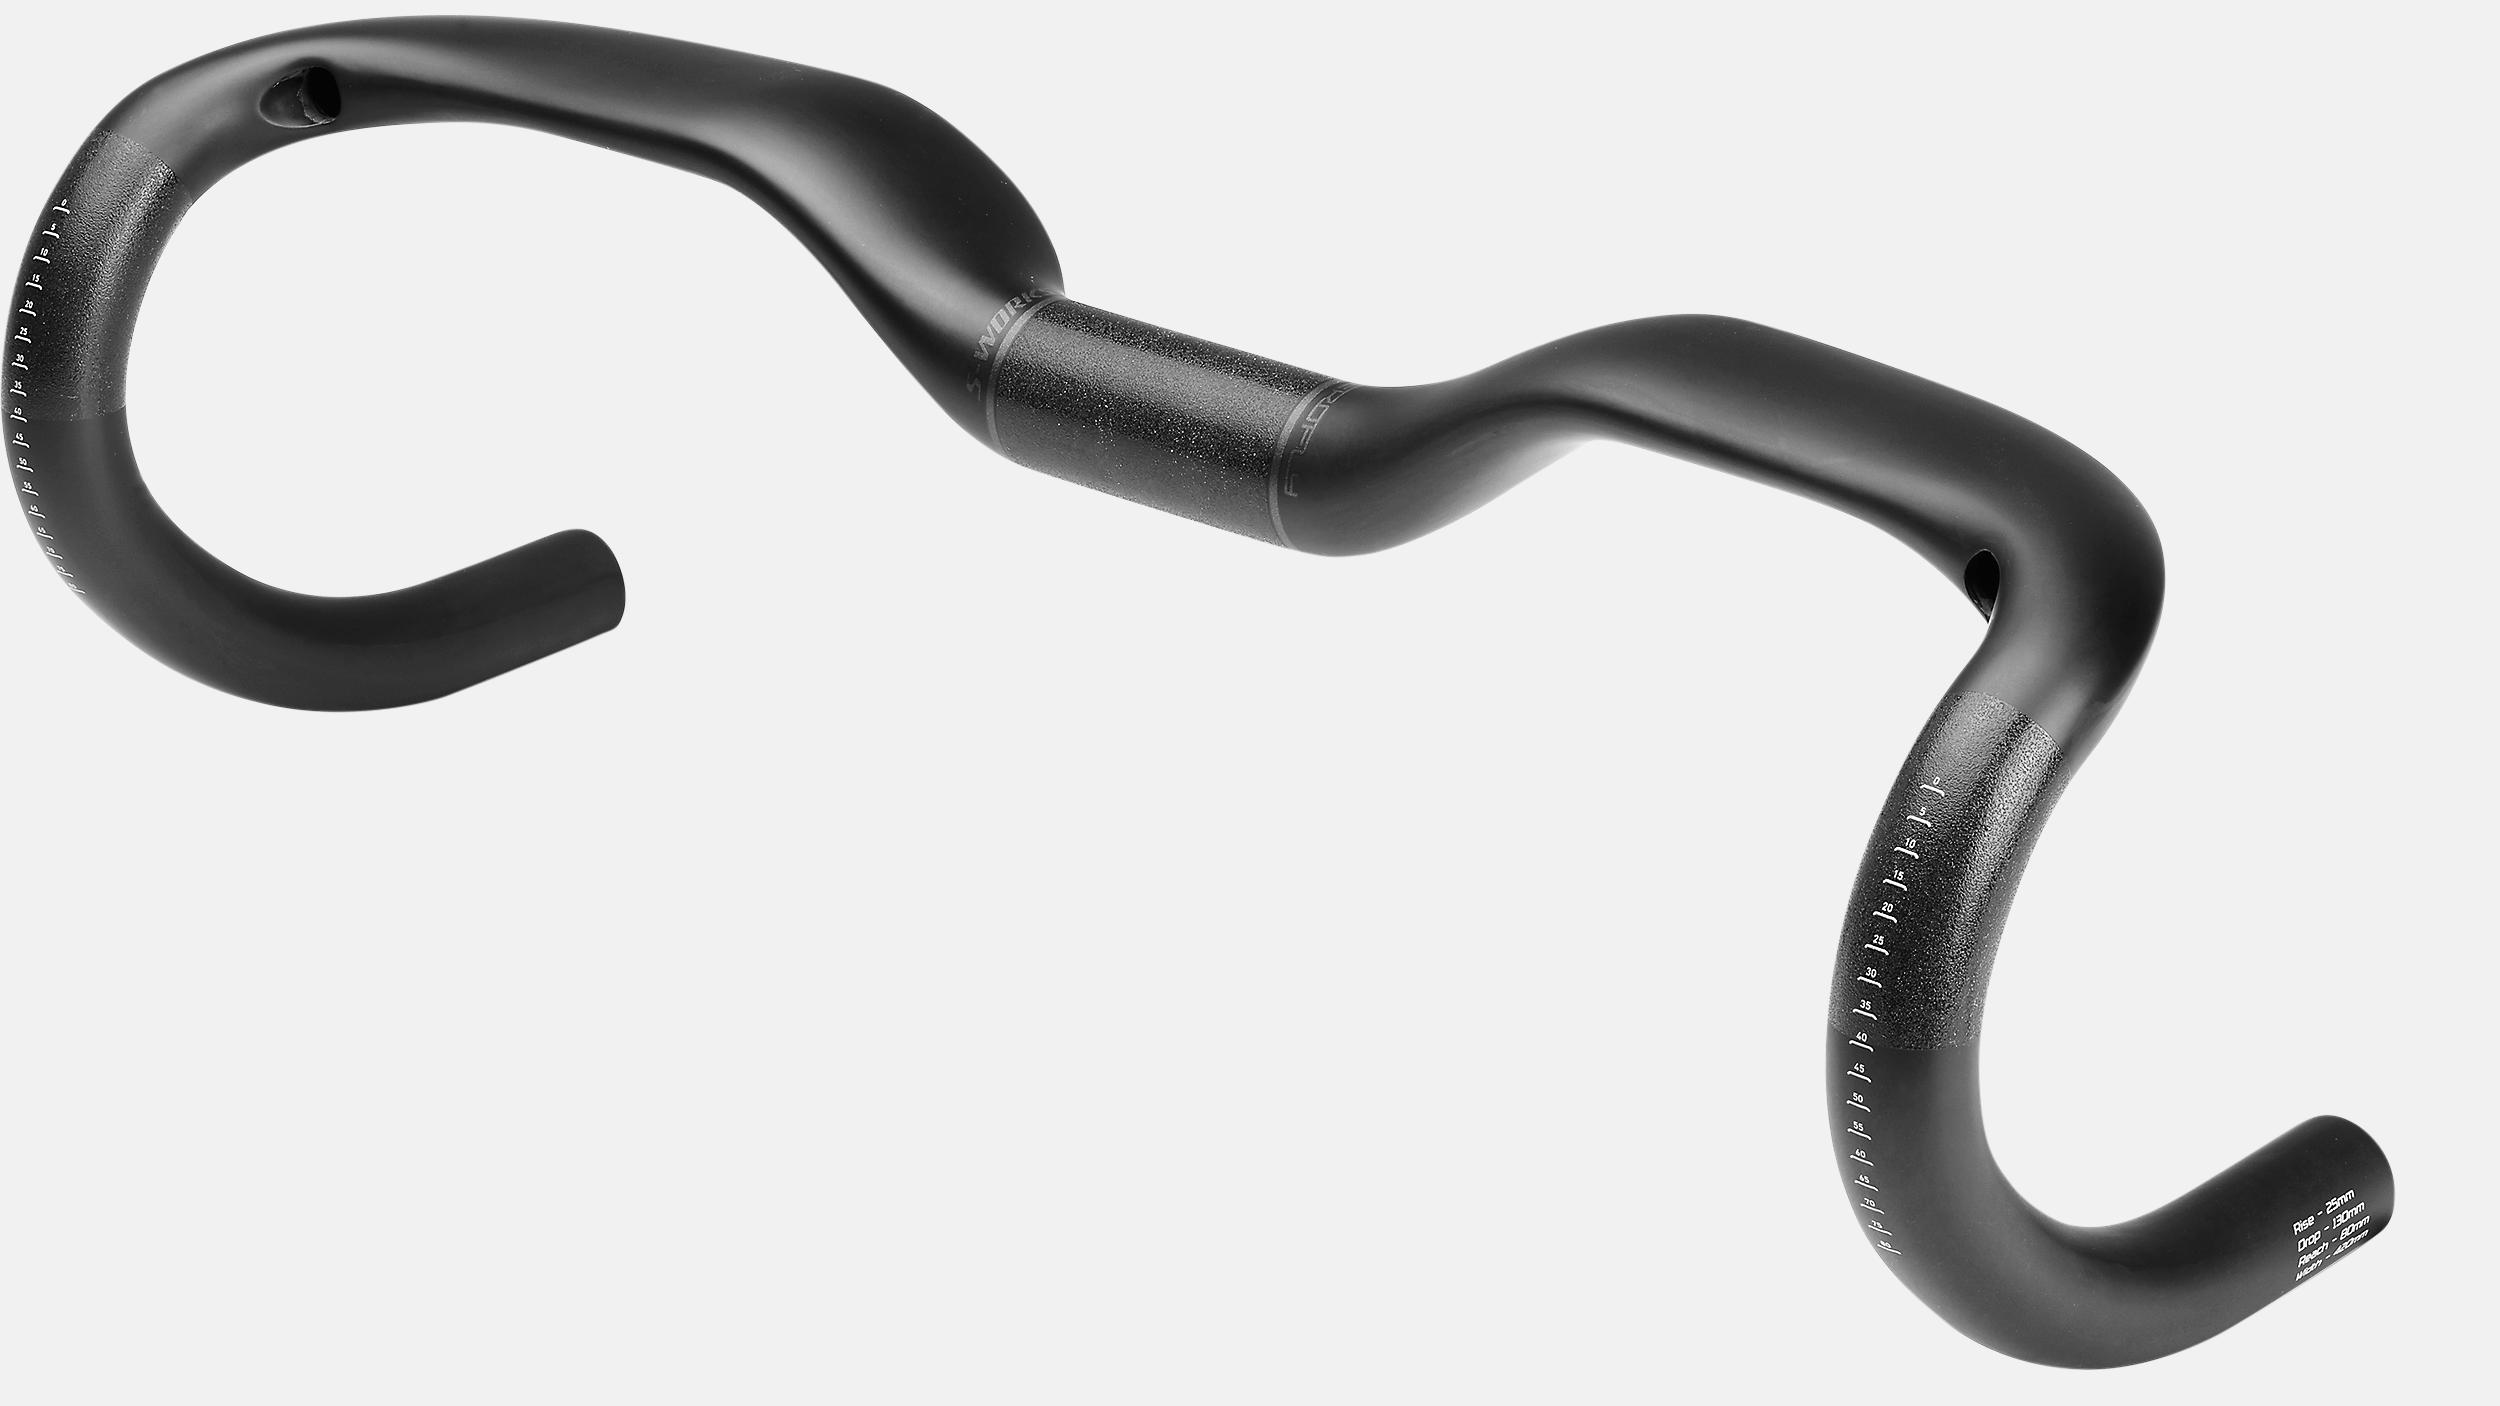 S-works Roval Rapide Handlebar, carbon42